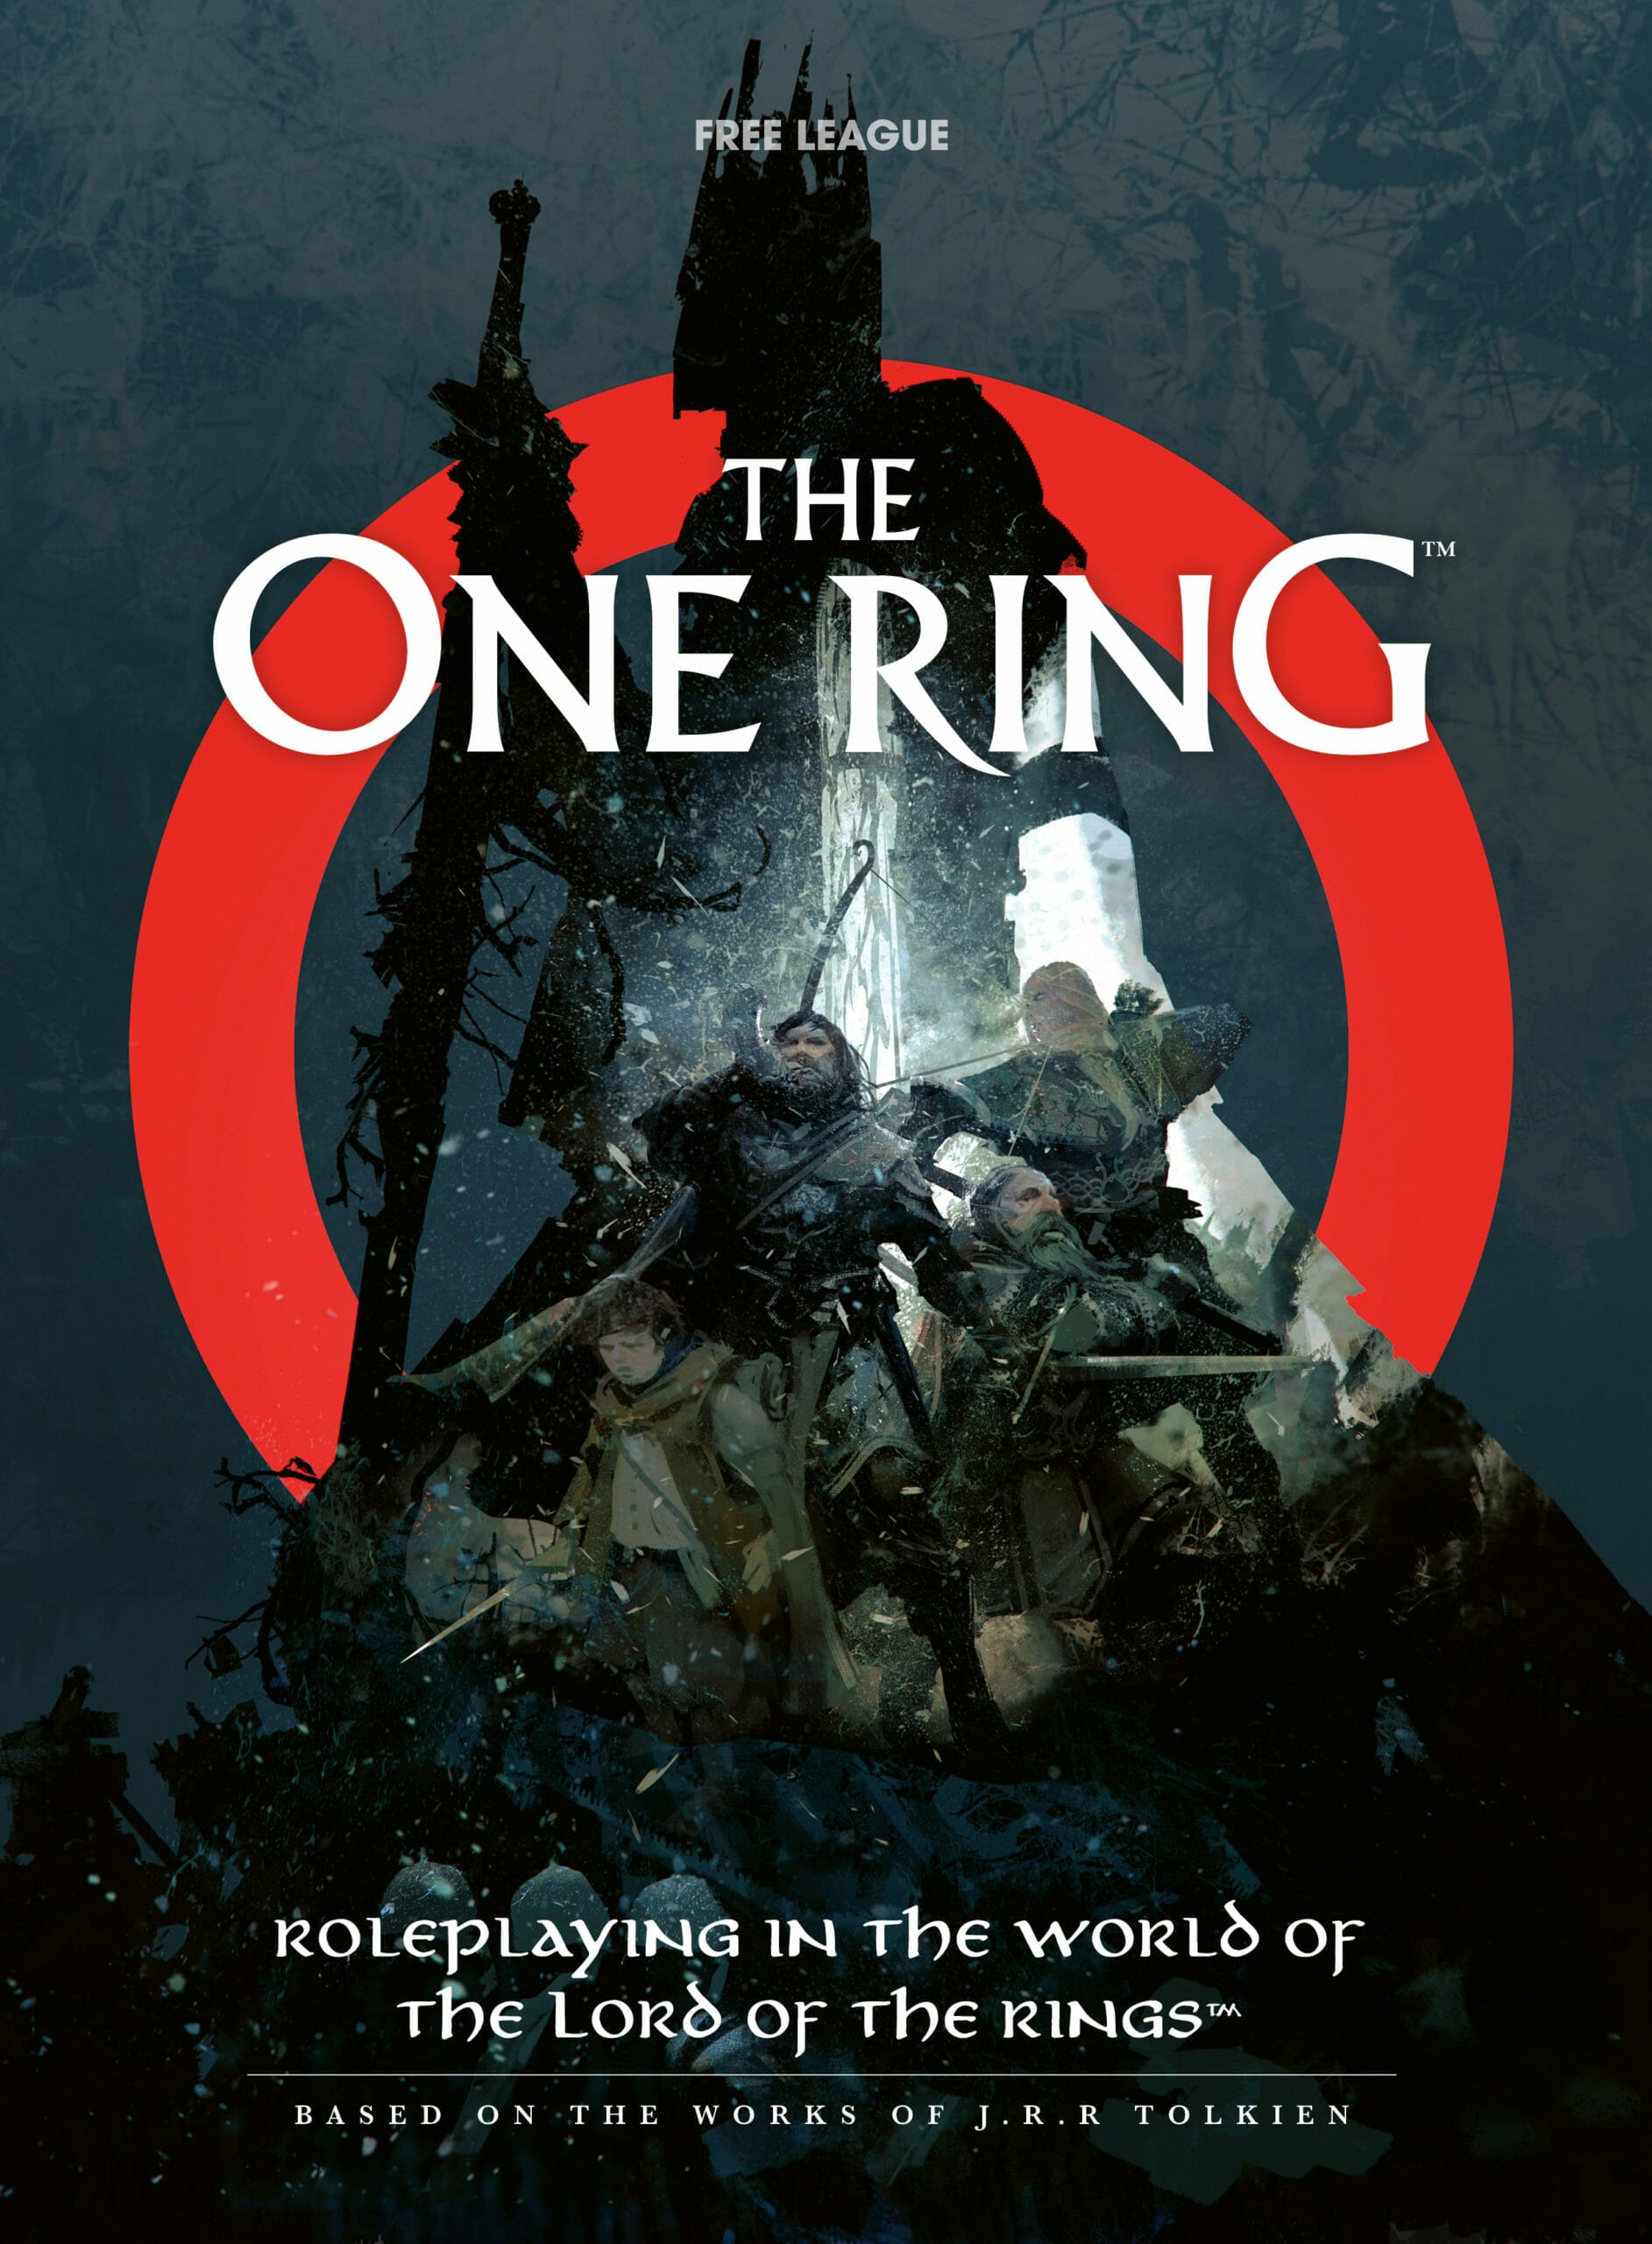 The Lord of the Rings RPG 2e